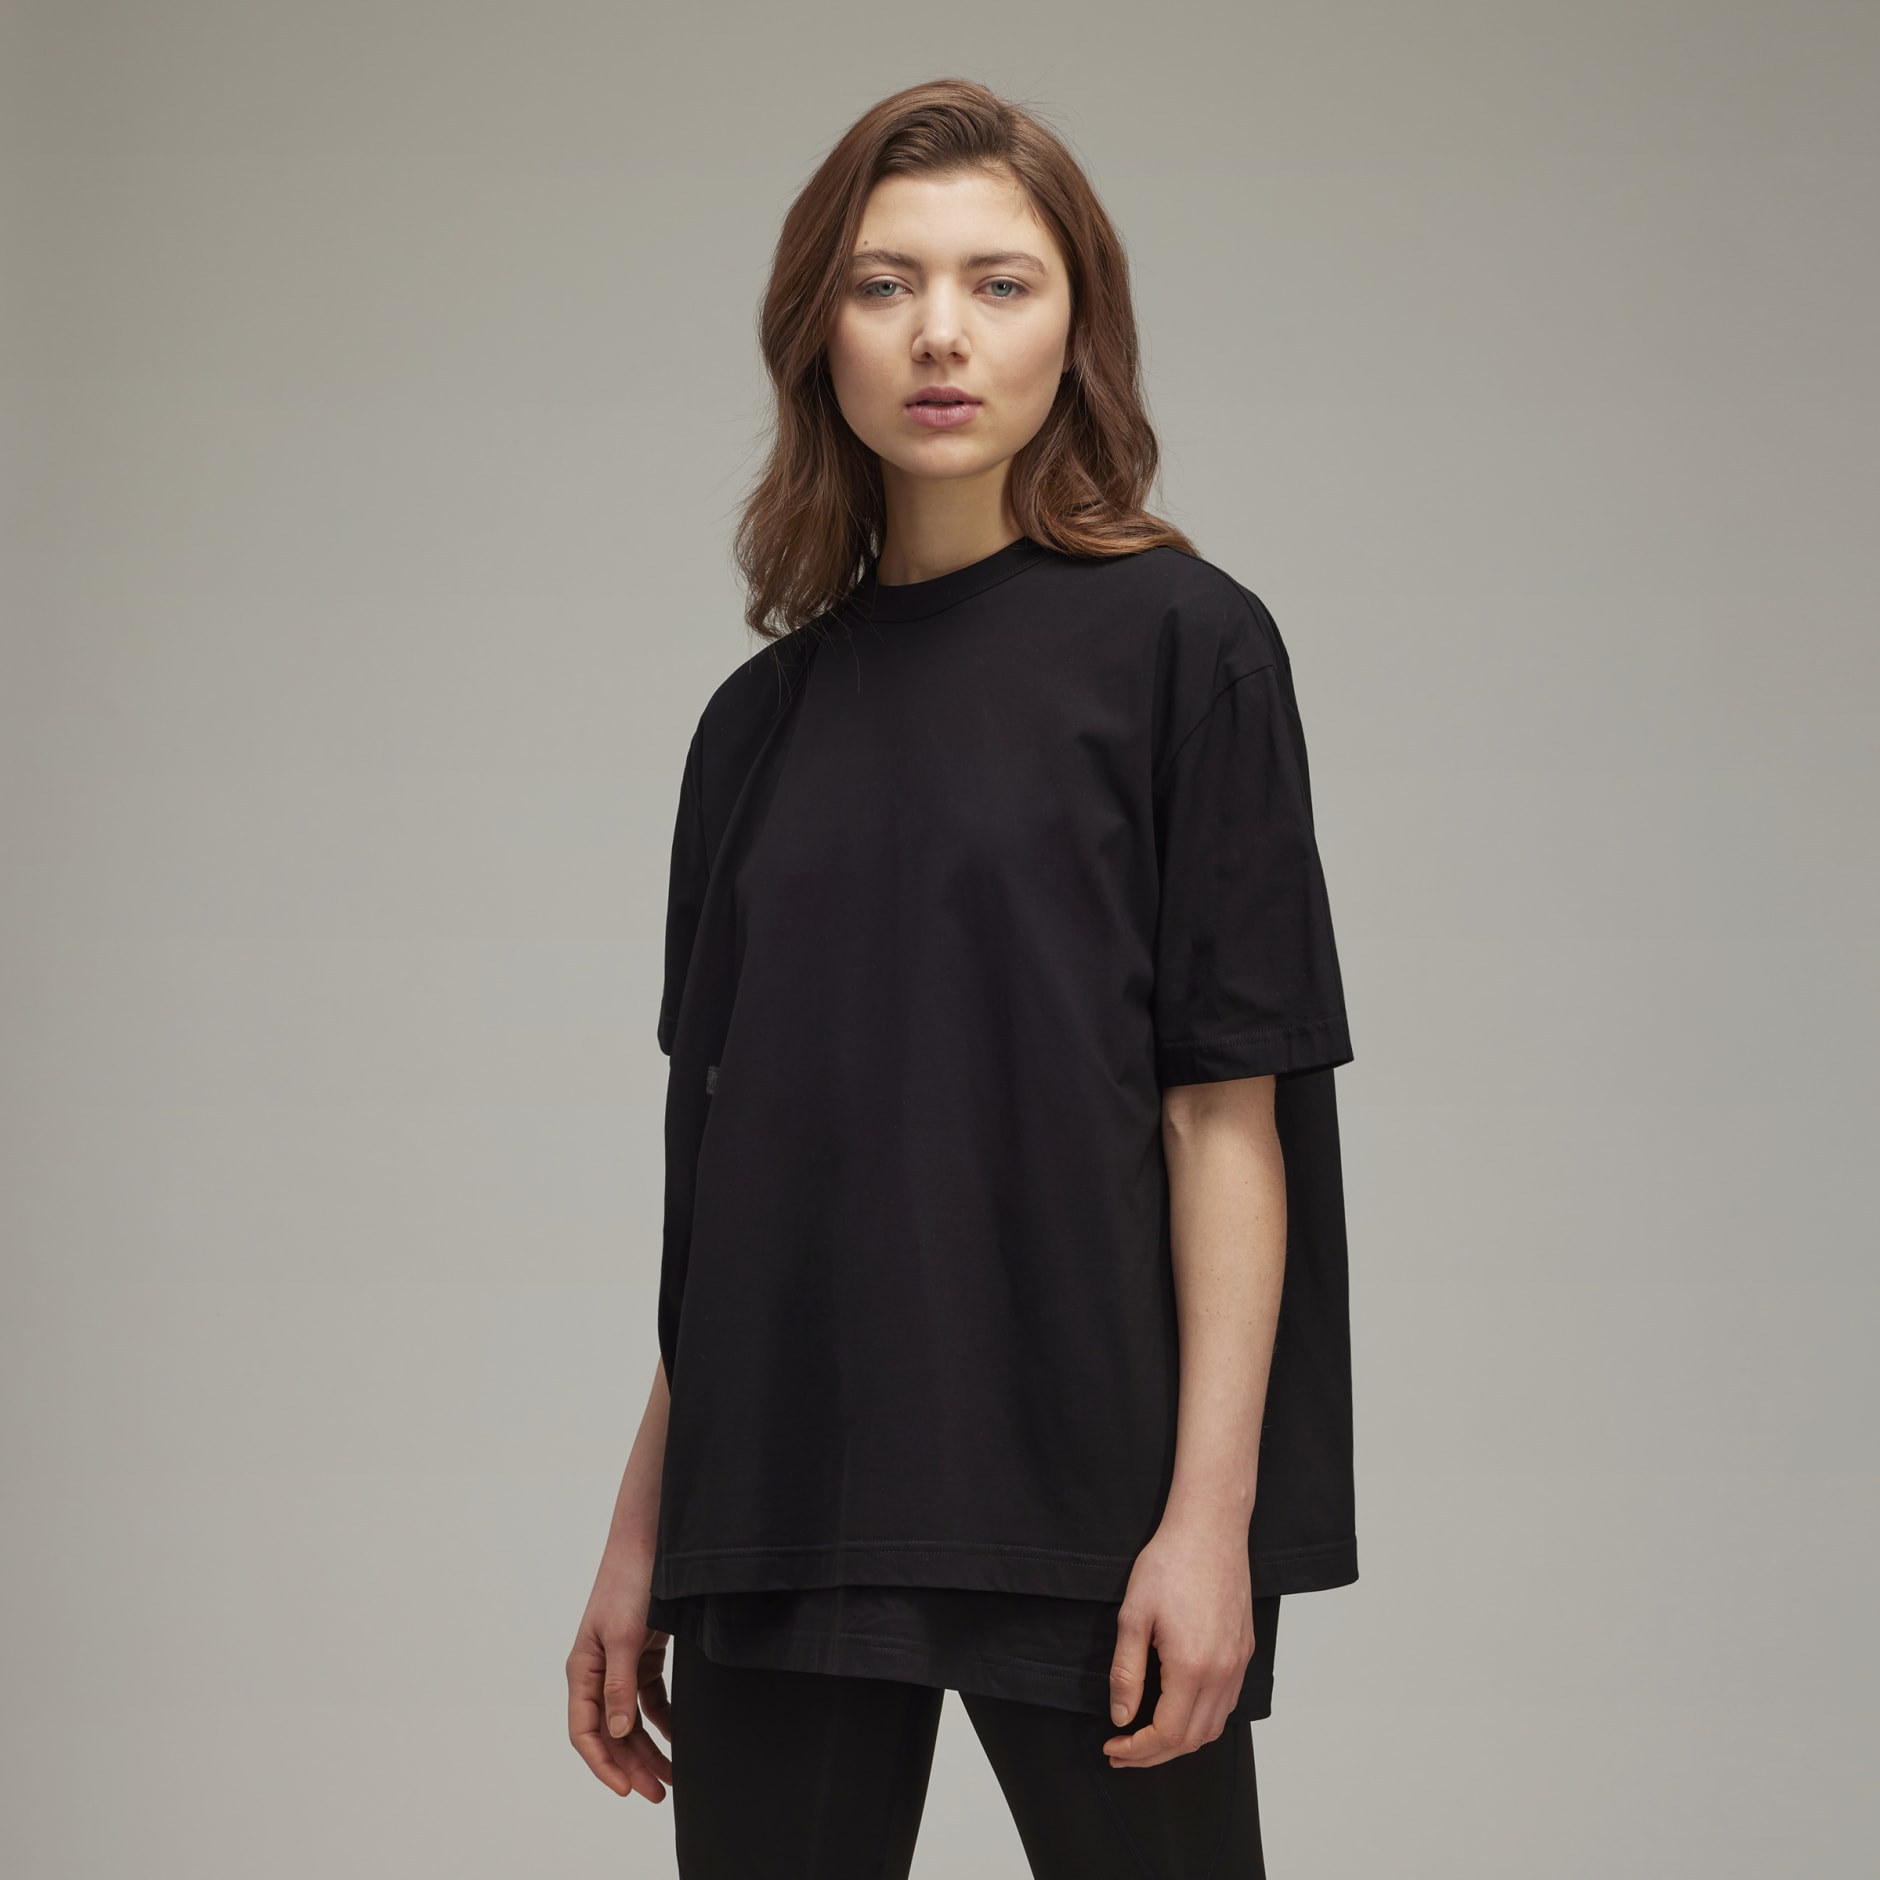 Clothing - CH2 Dry Crepe Jersey Short Sleeve Tee - Black | adidas South ...